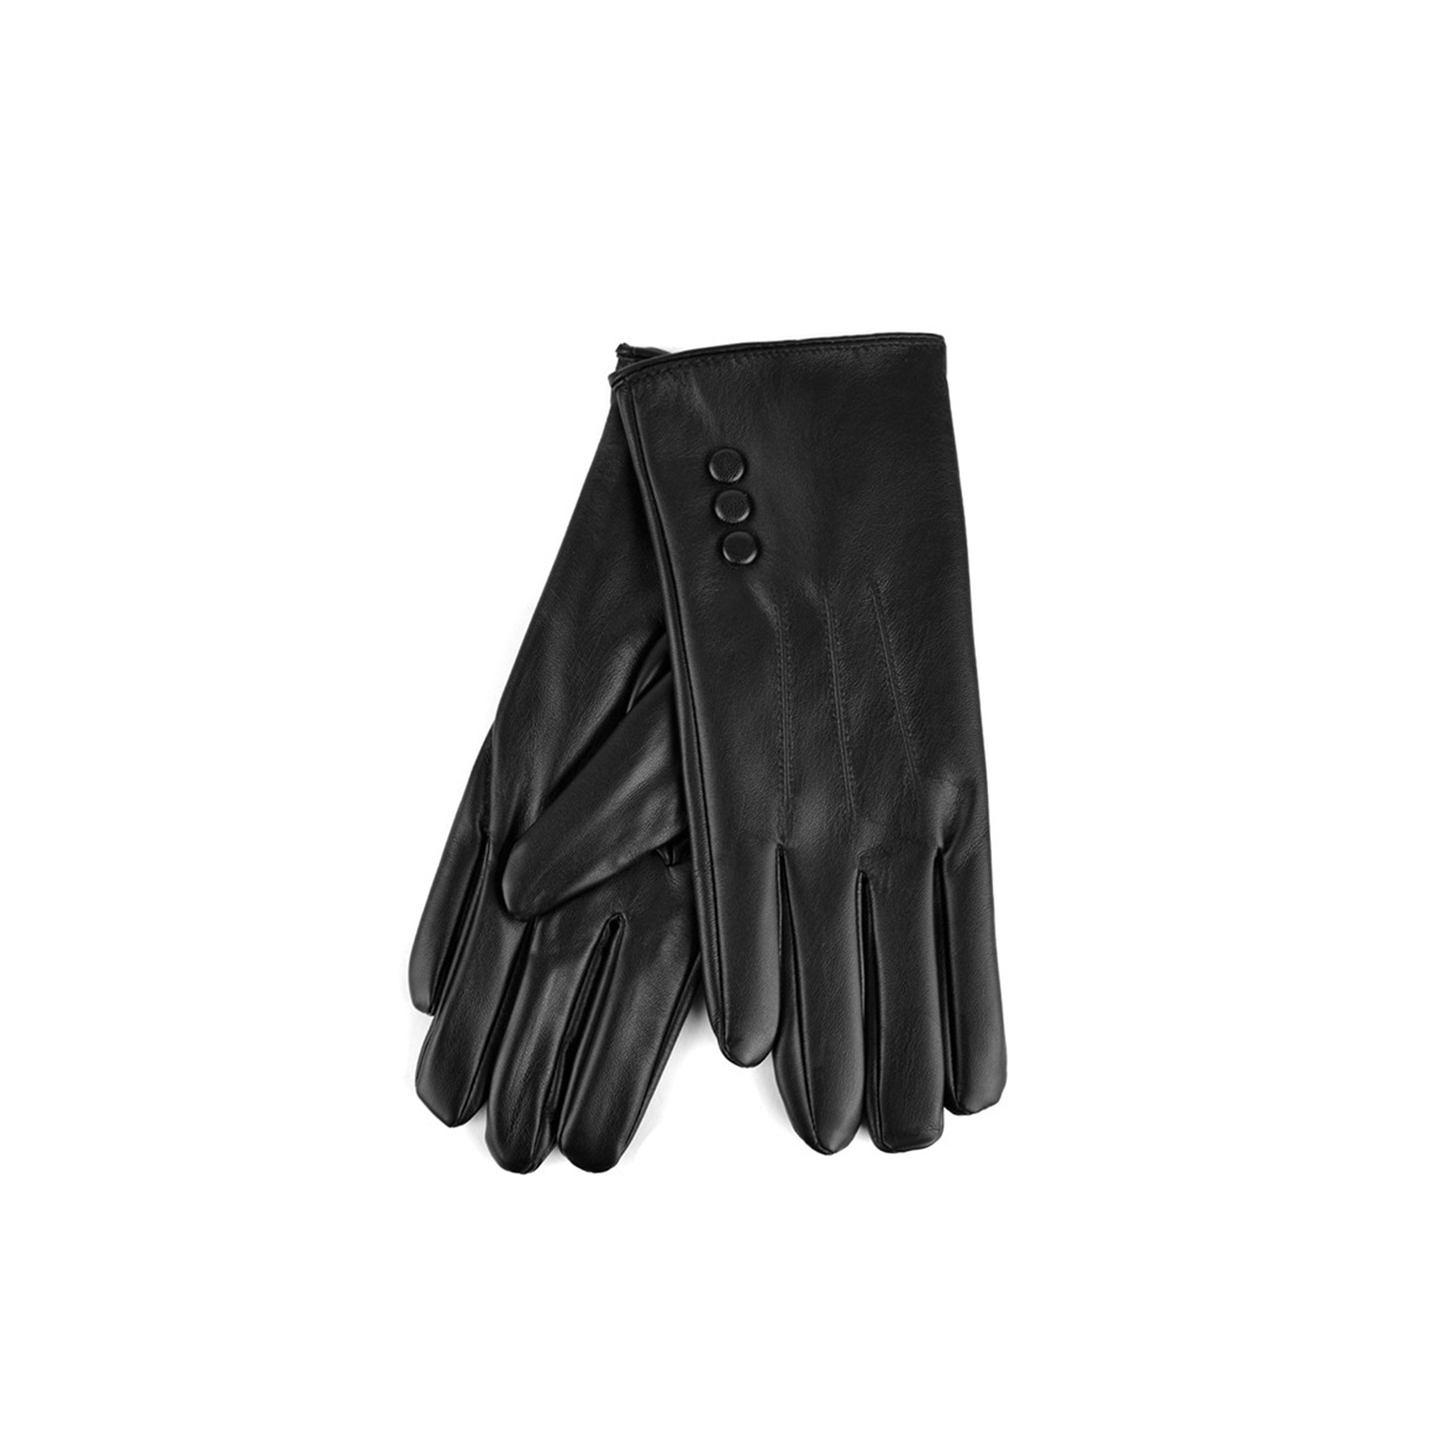 Touch Screen Glove. These soft and stylish faux leather gloves will have you texting all winter long!